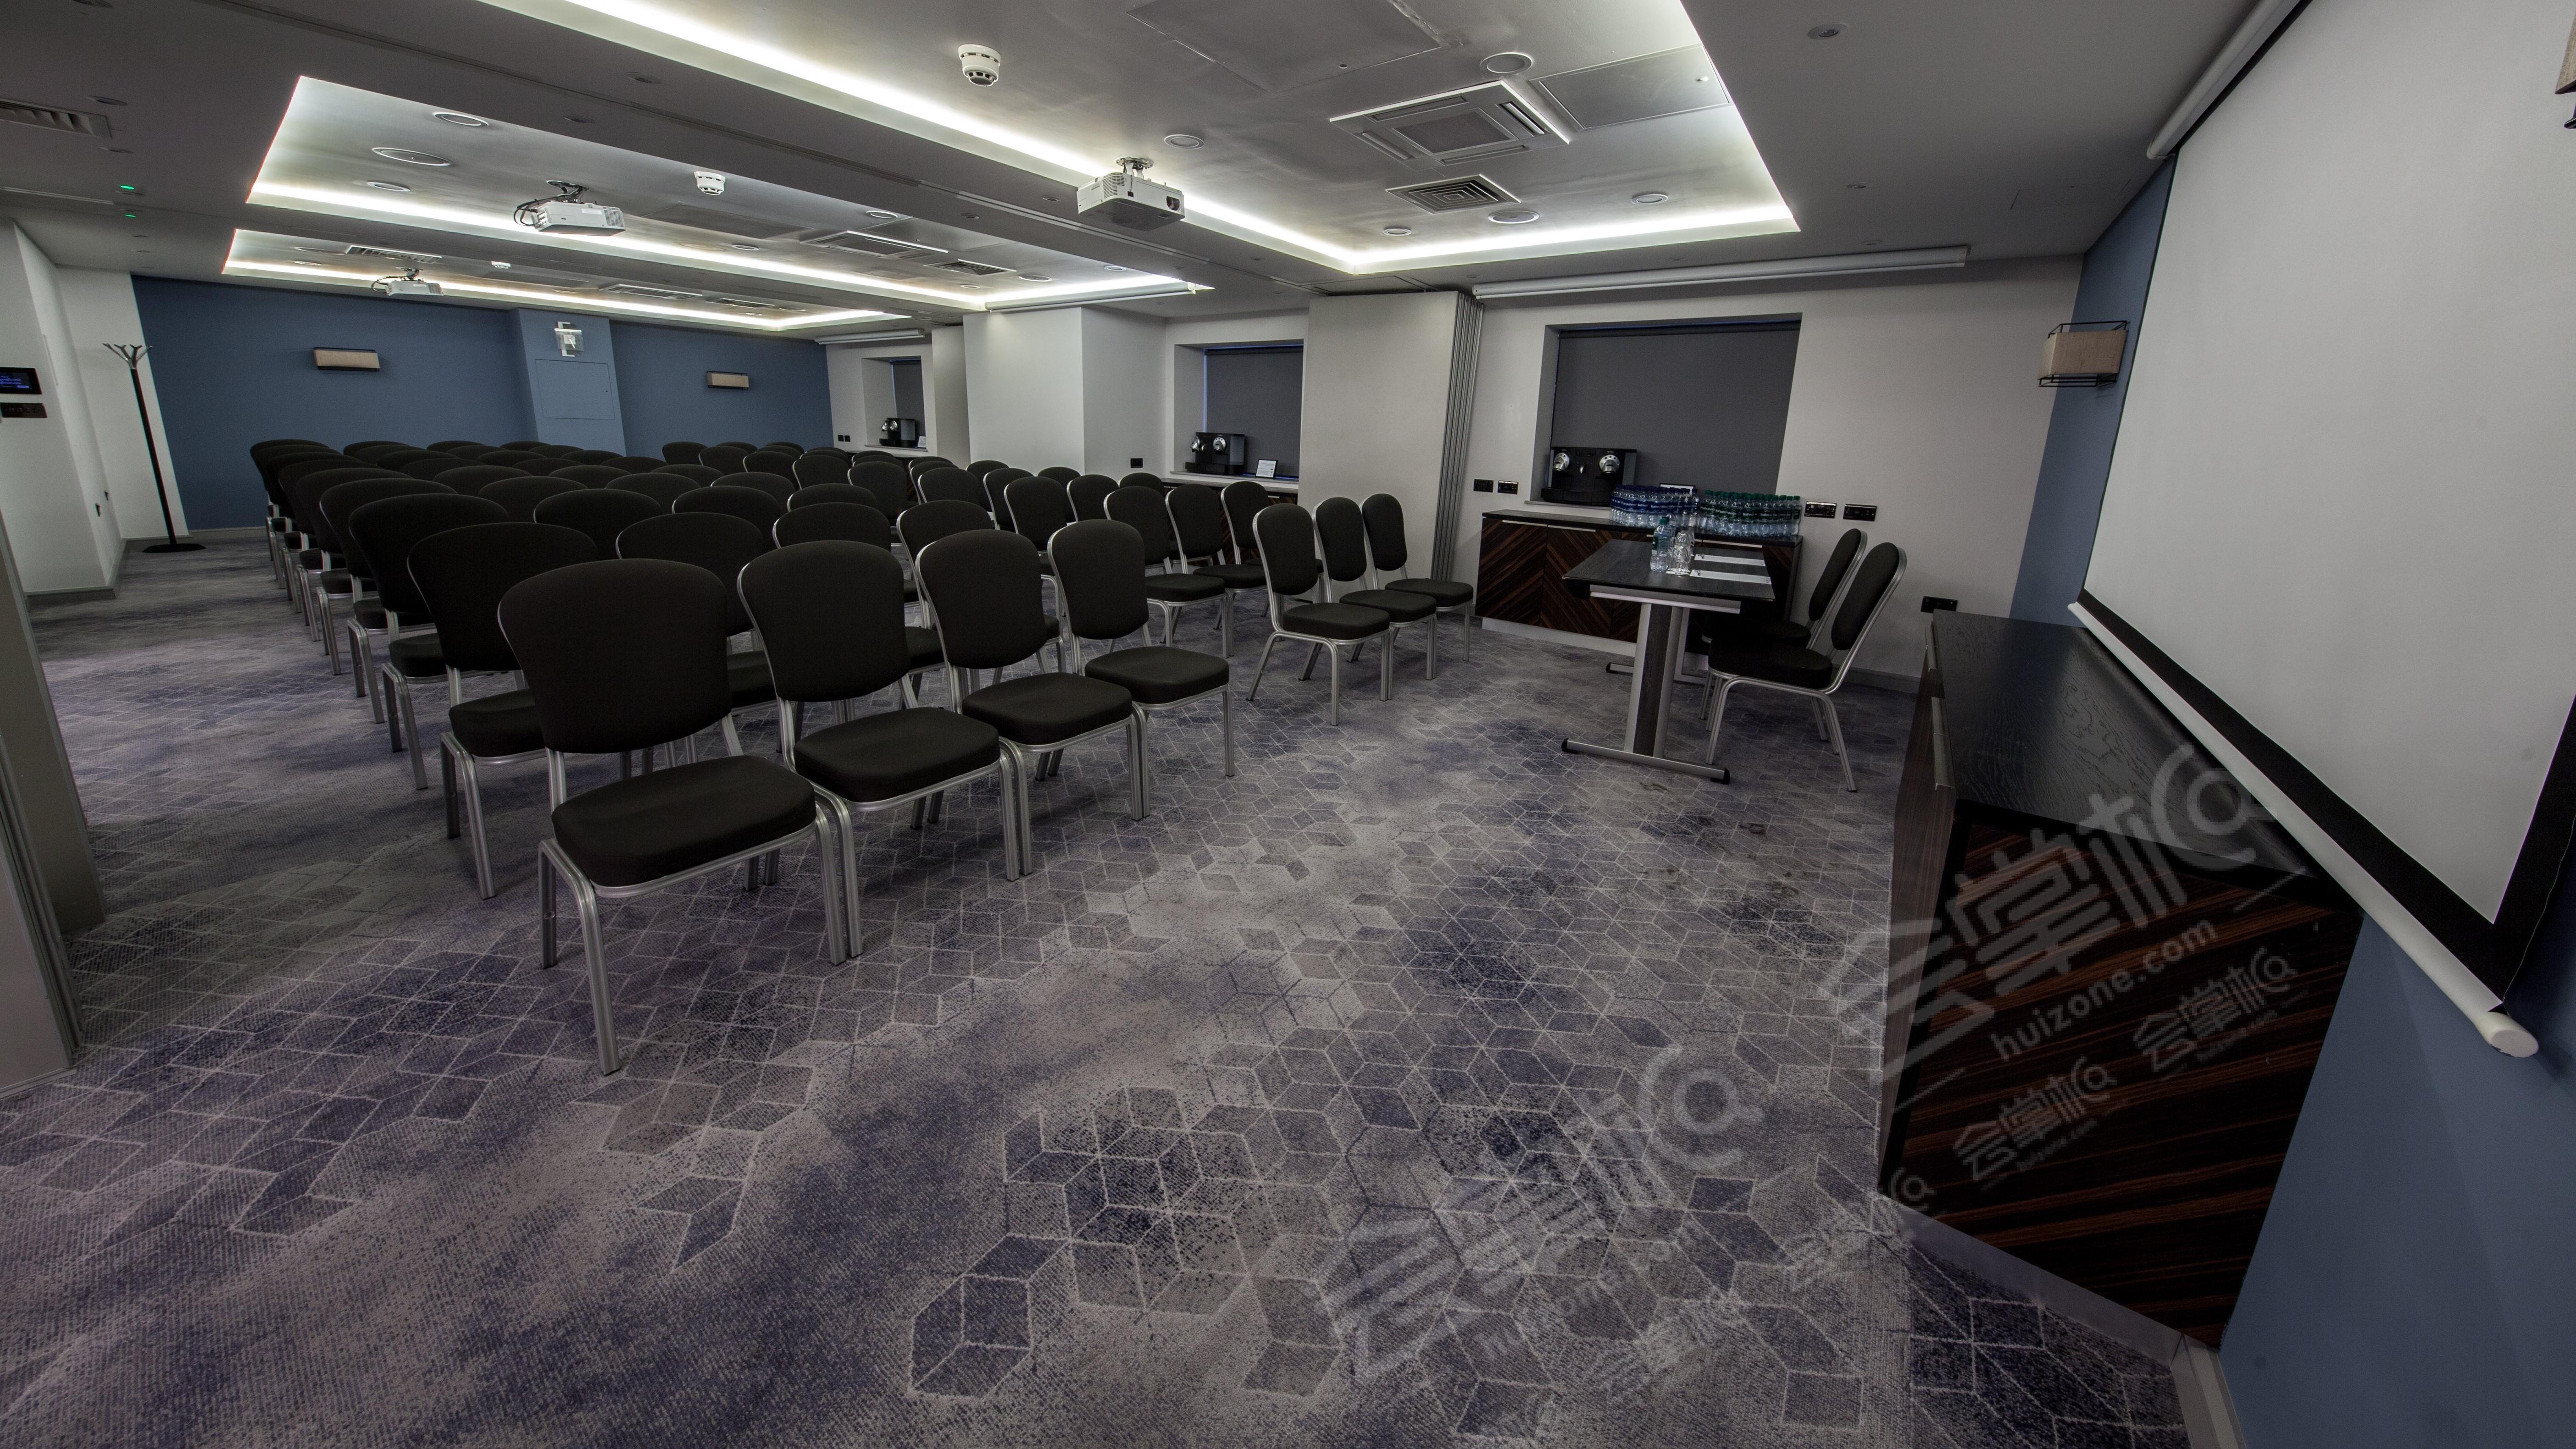 The Birmingham Conference and Events Centre at the Holiday Inn Birmingham City Centre5